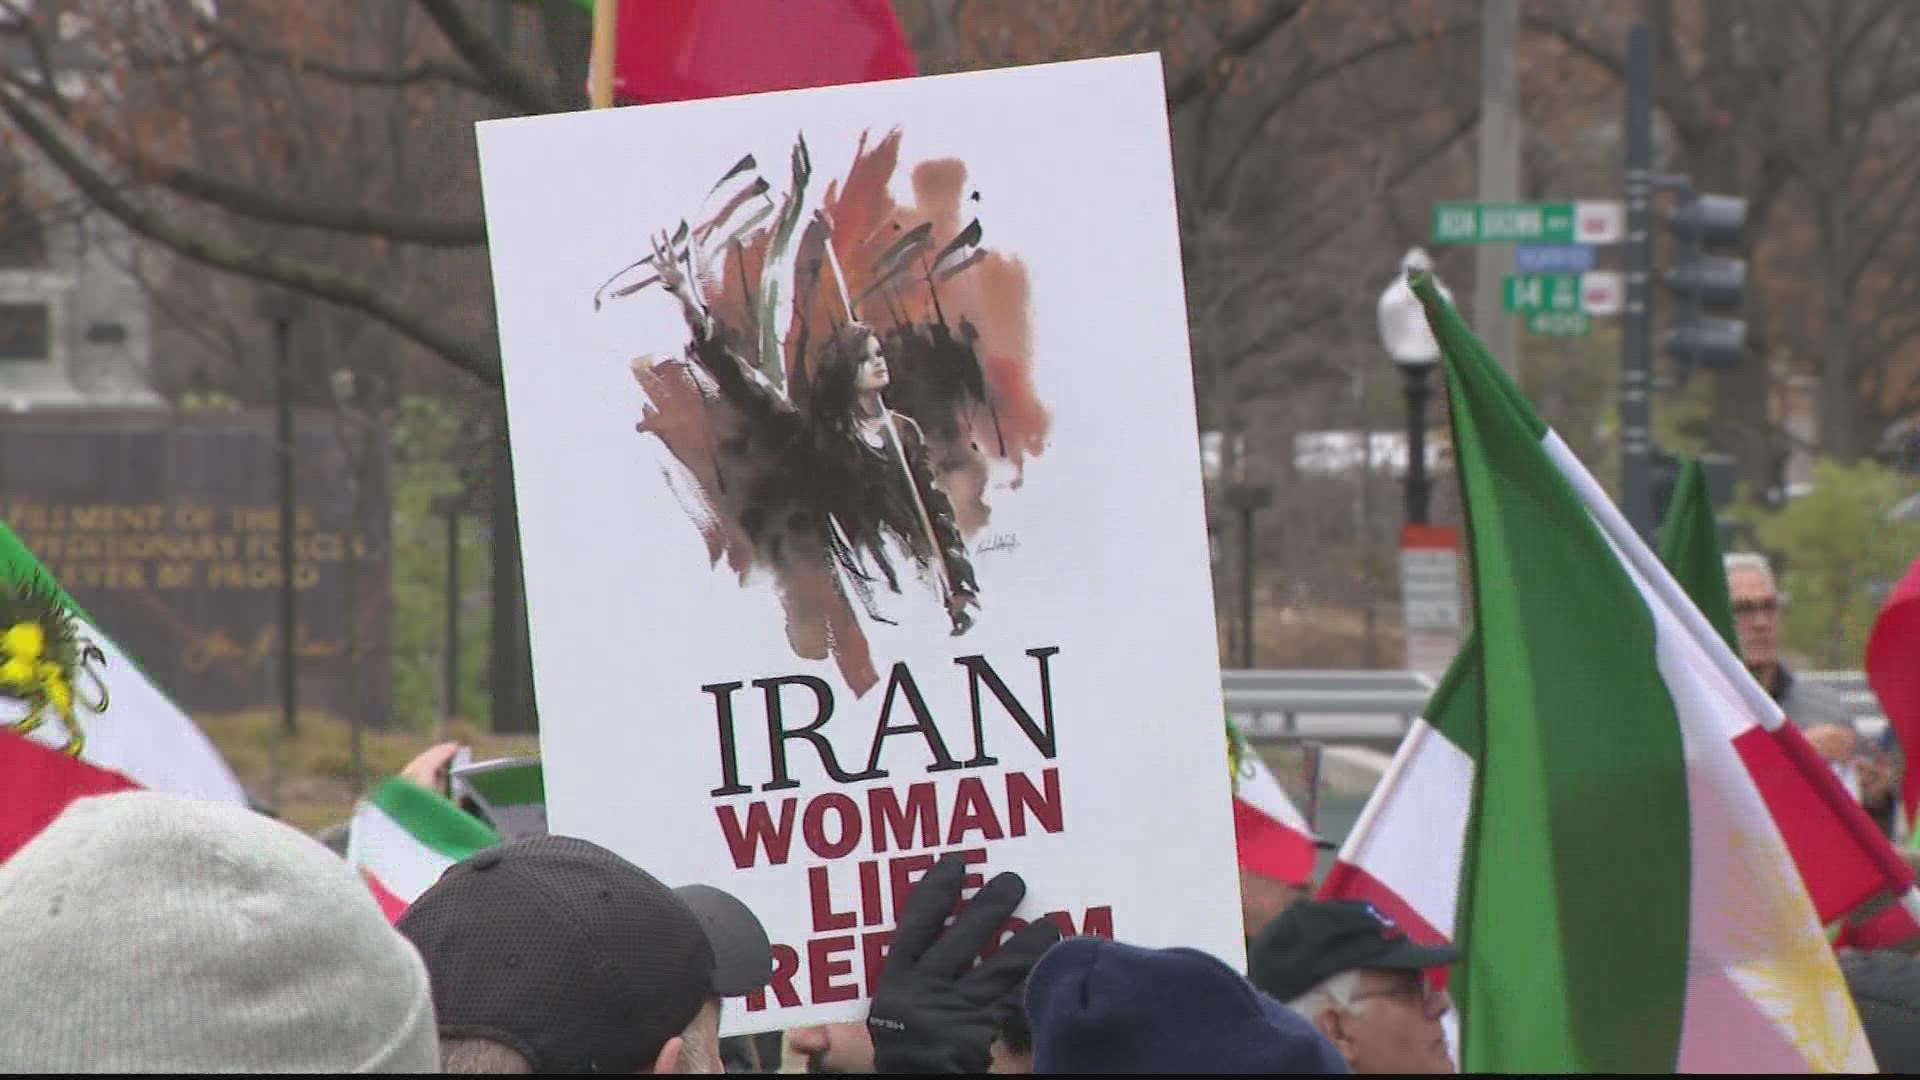 The rally in DC comes just days after the Iranian government carried out its first known execution of an activist involved in this wave of protests.